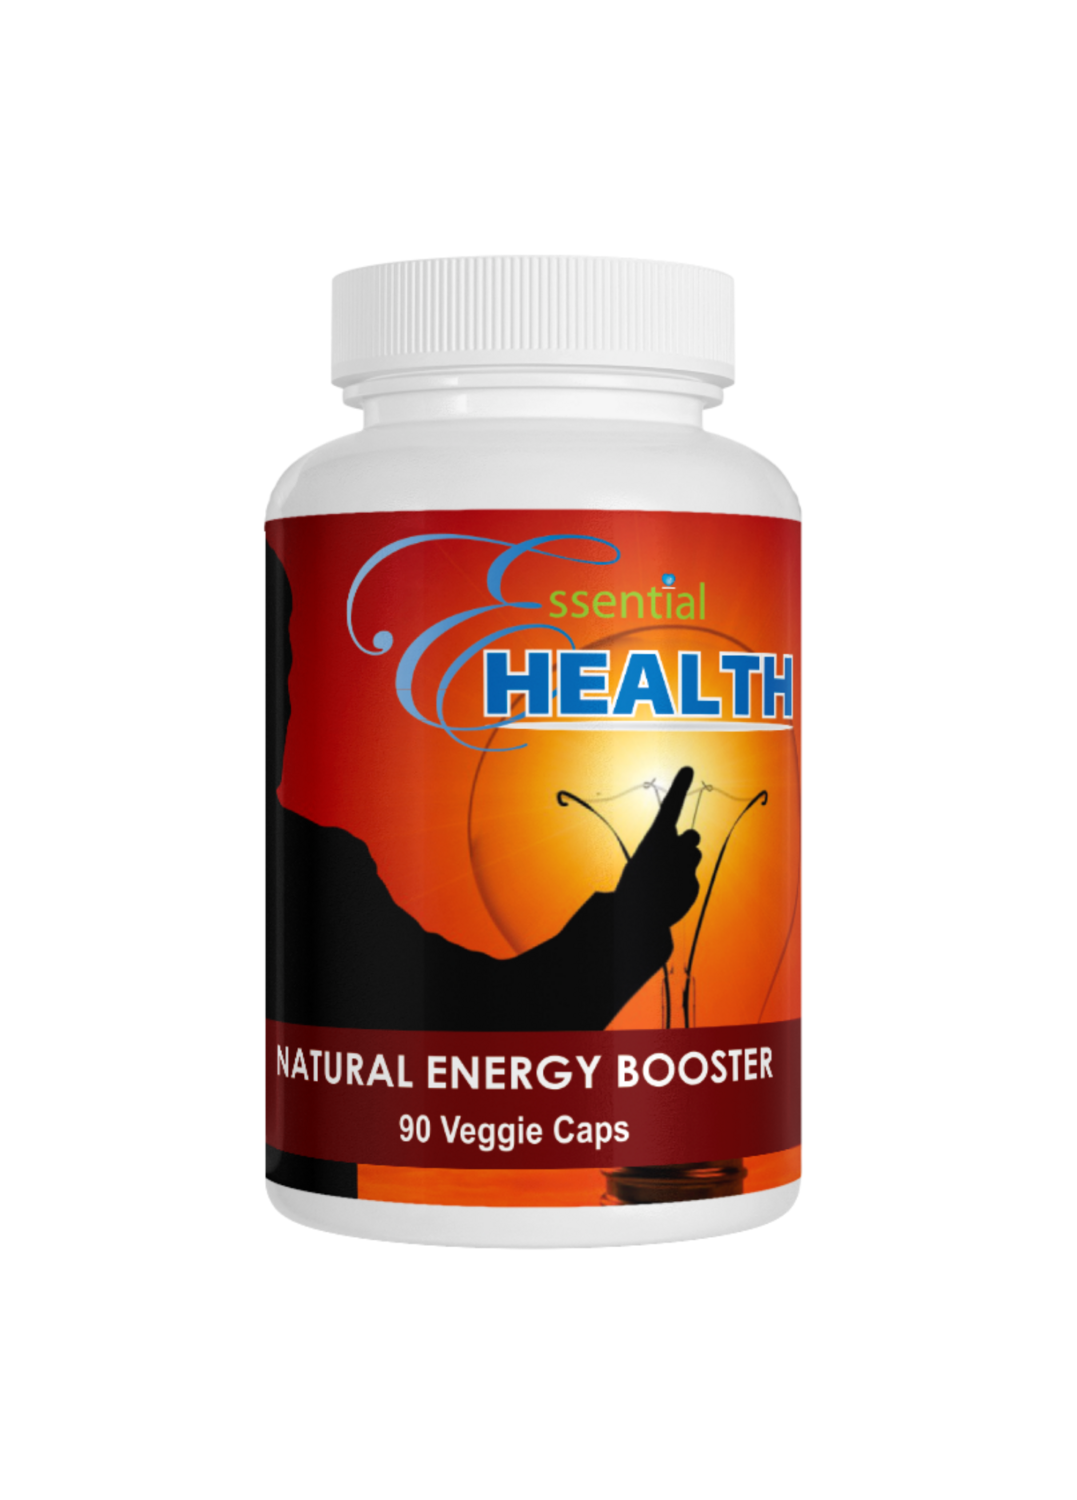 Essential Health Natural Energy Booster Capsules